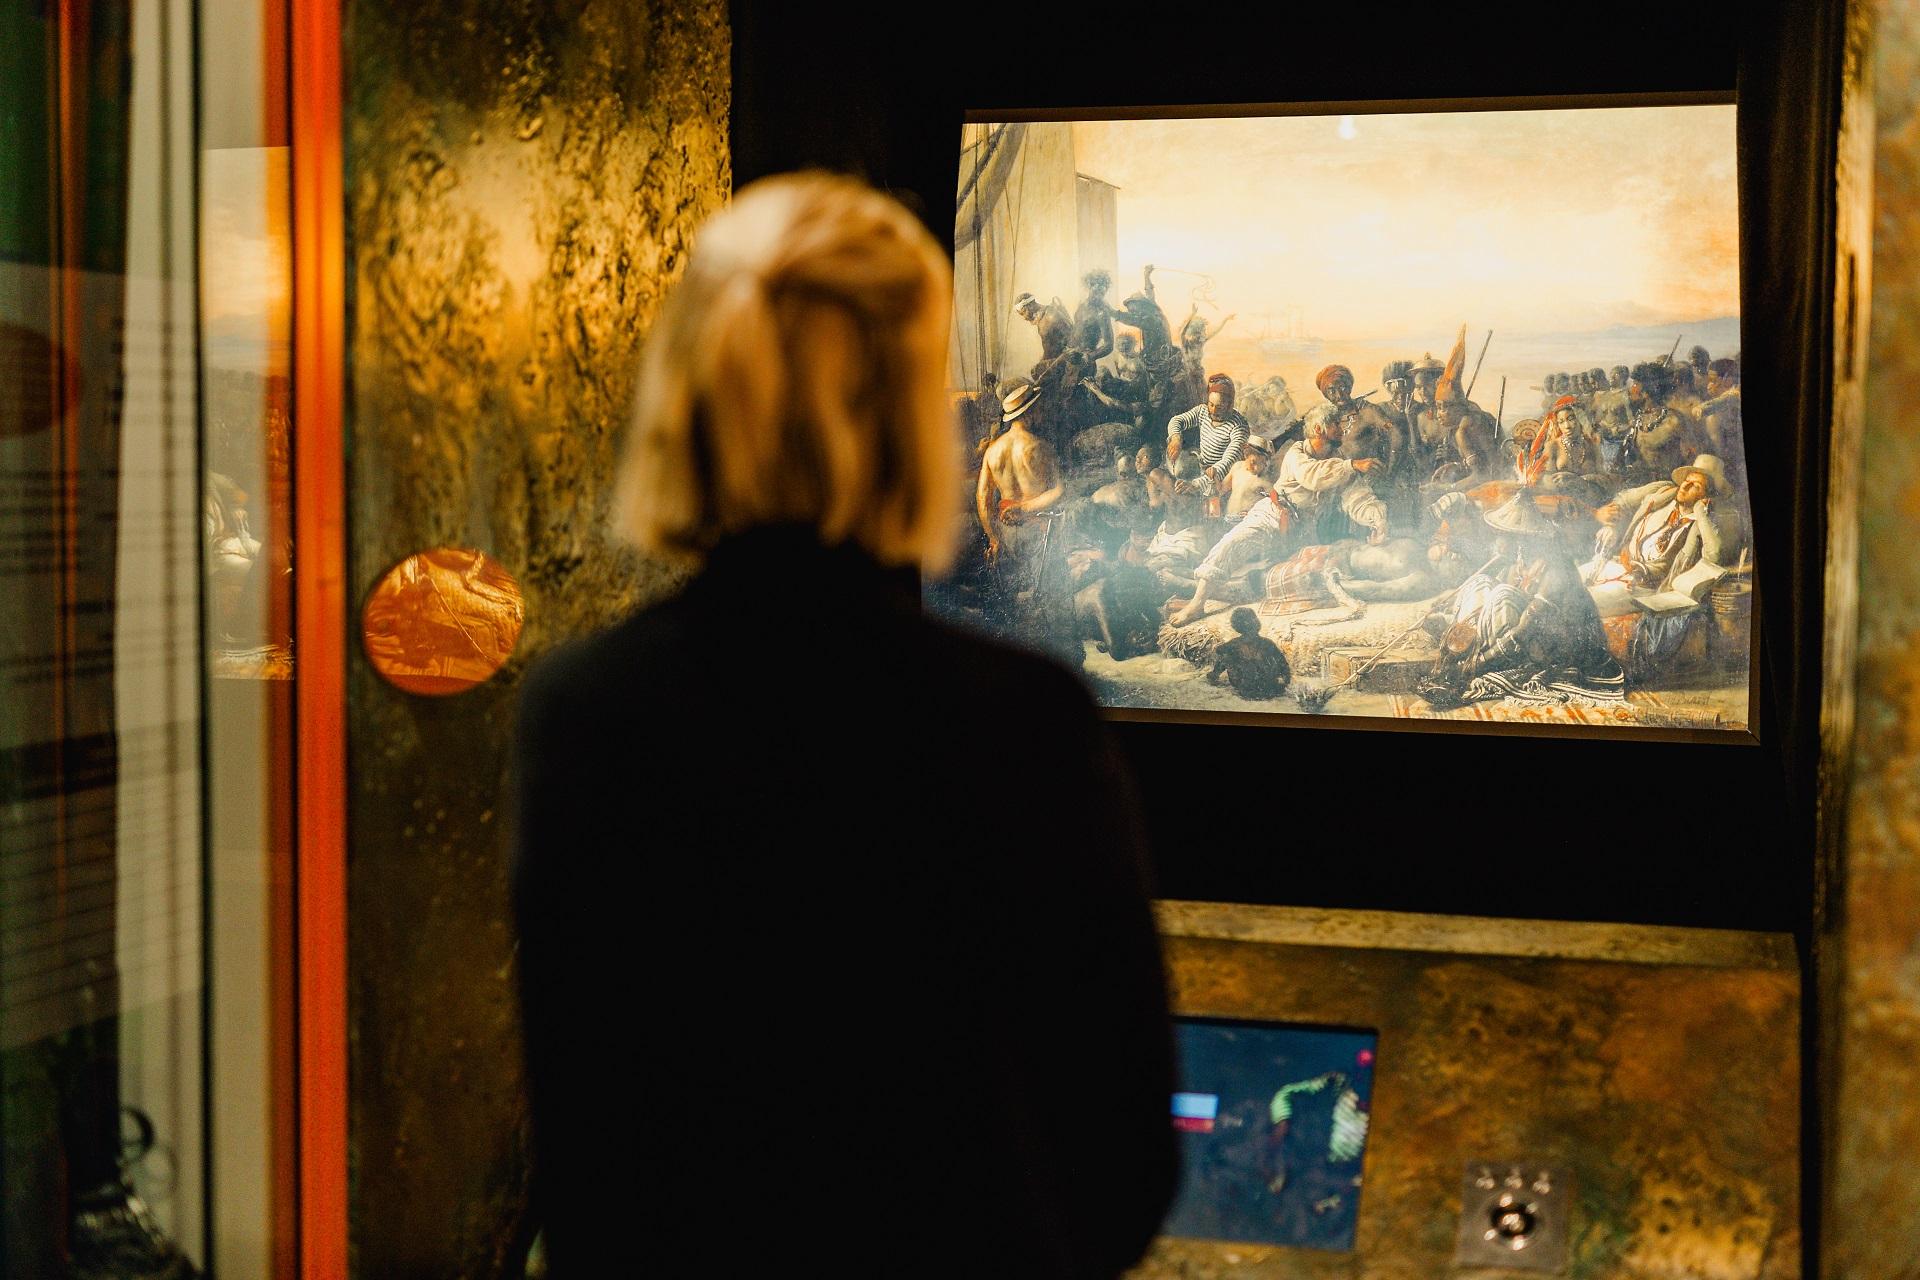 A woman looking at a painting on a screen in a museum.